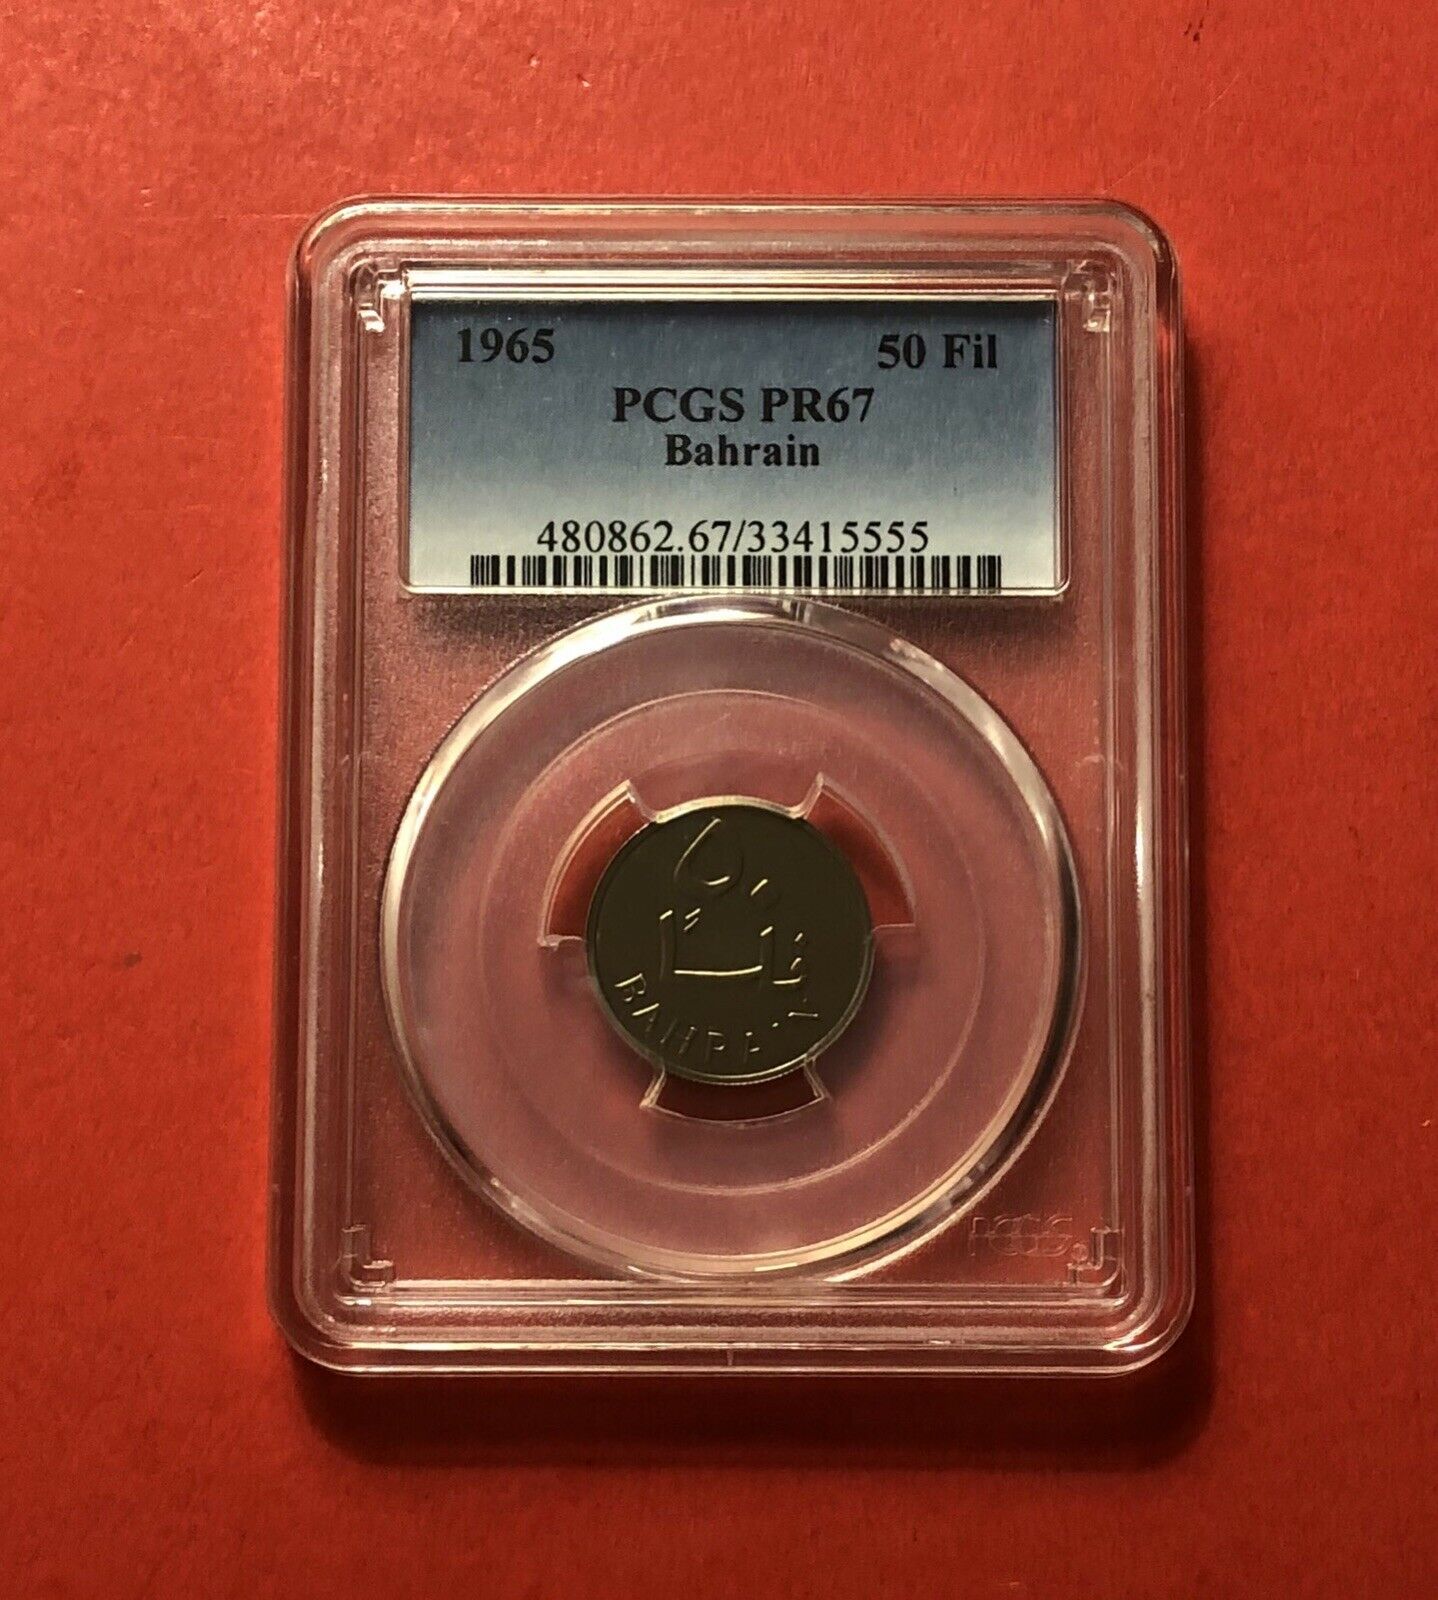 1965-bahrain-1 Proof Coin (50 Fils) ,graded By Pcgs Pr 67.